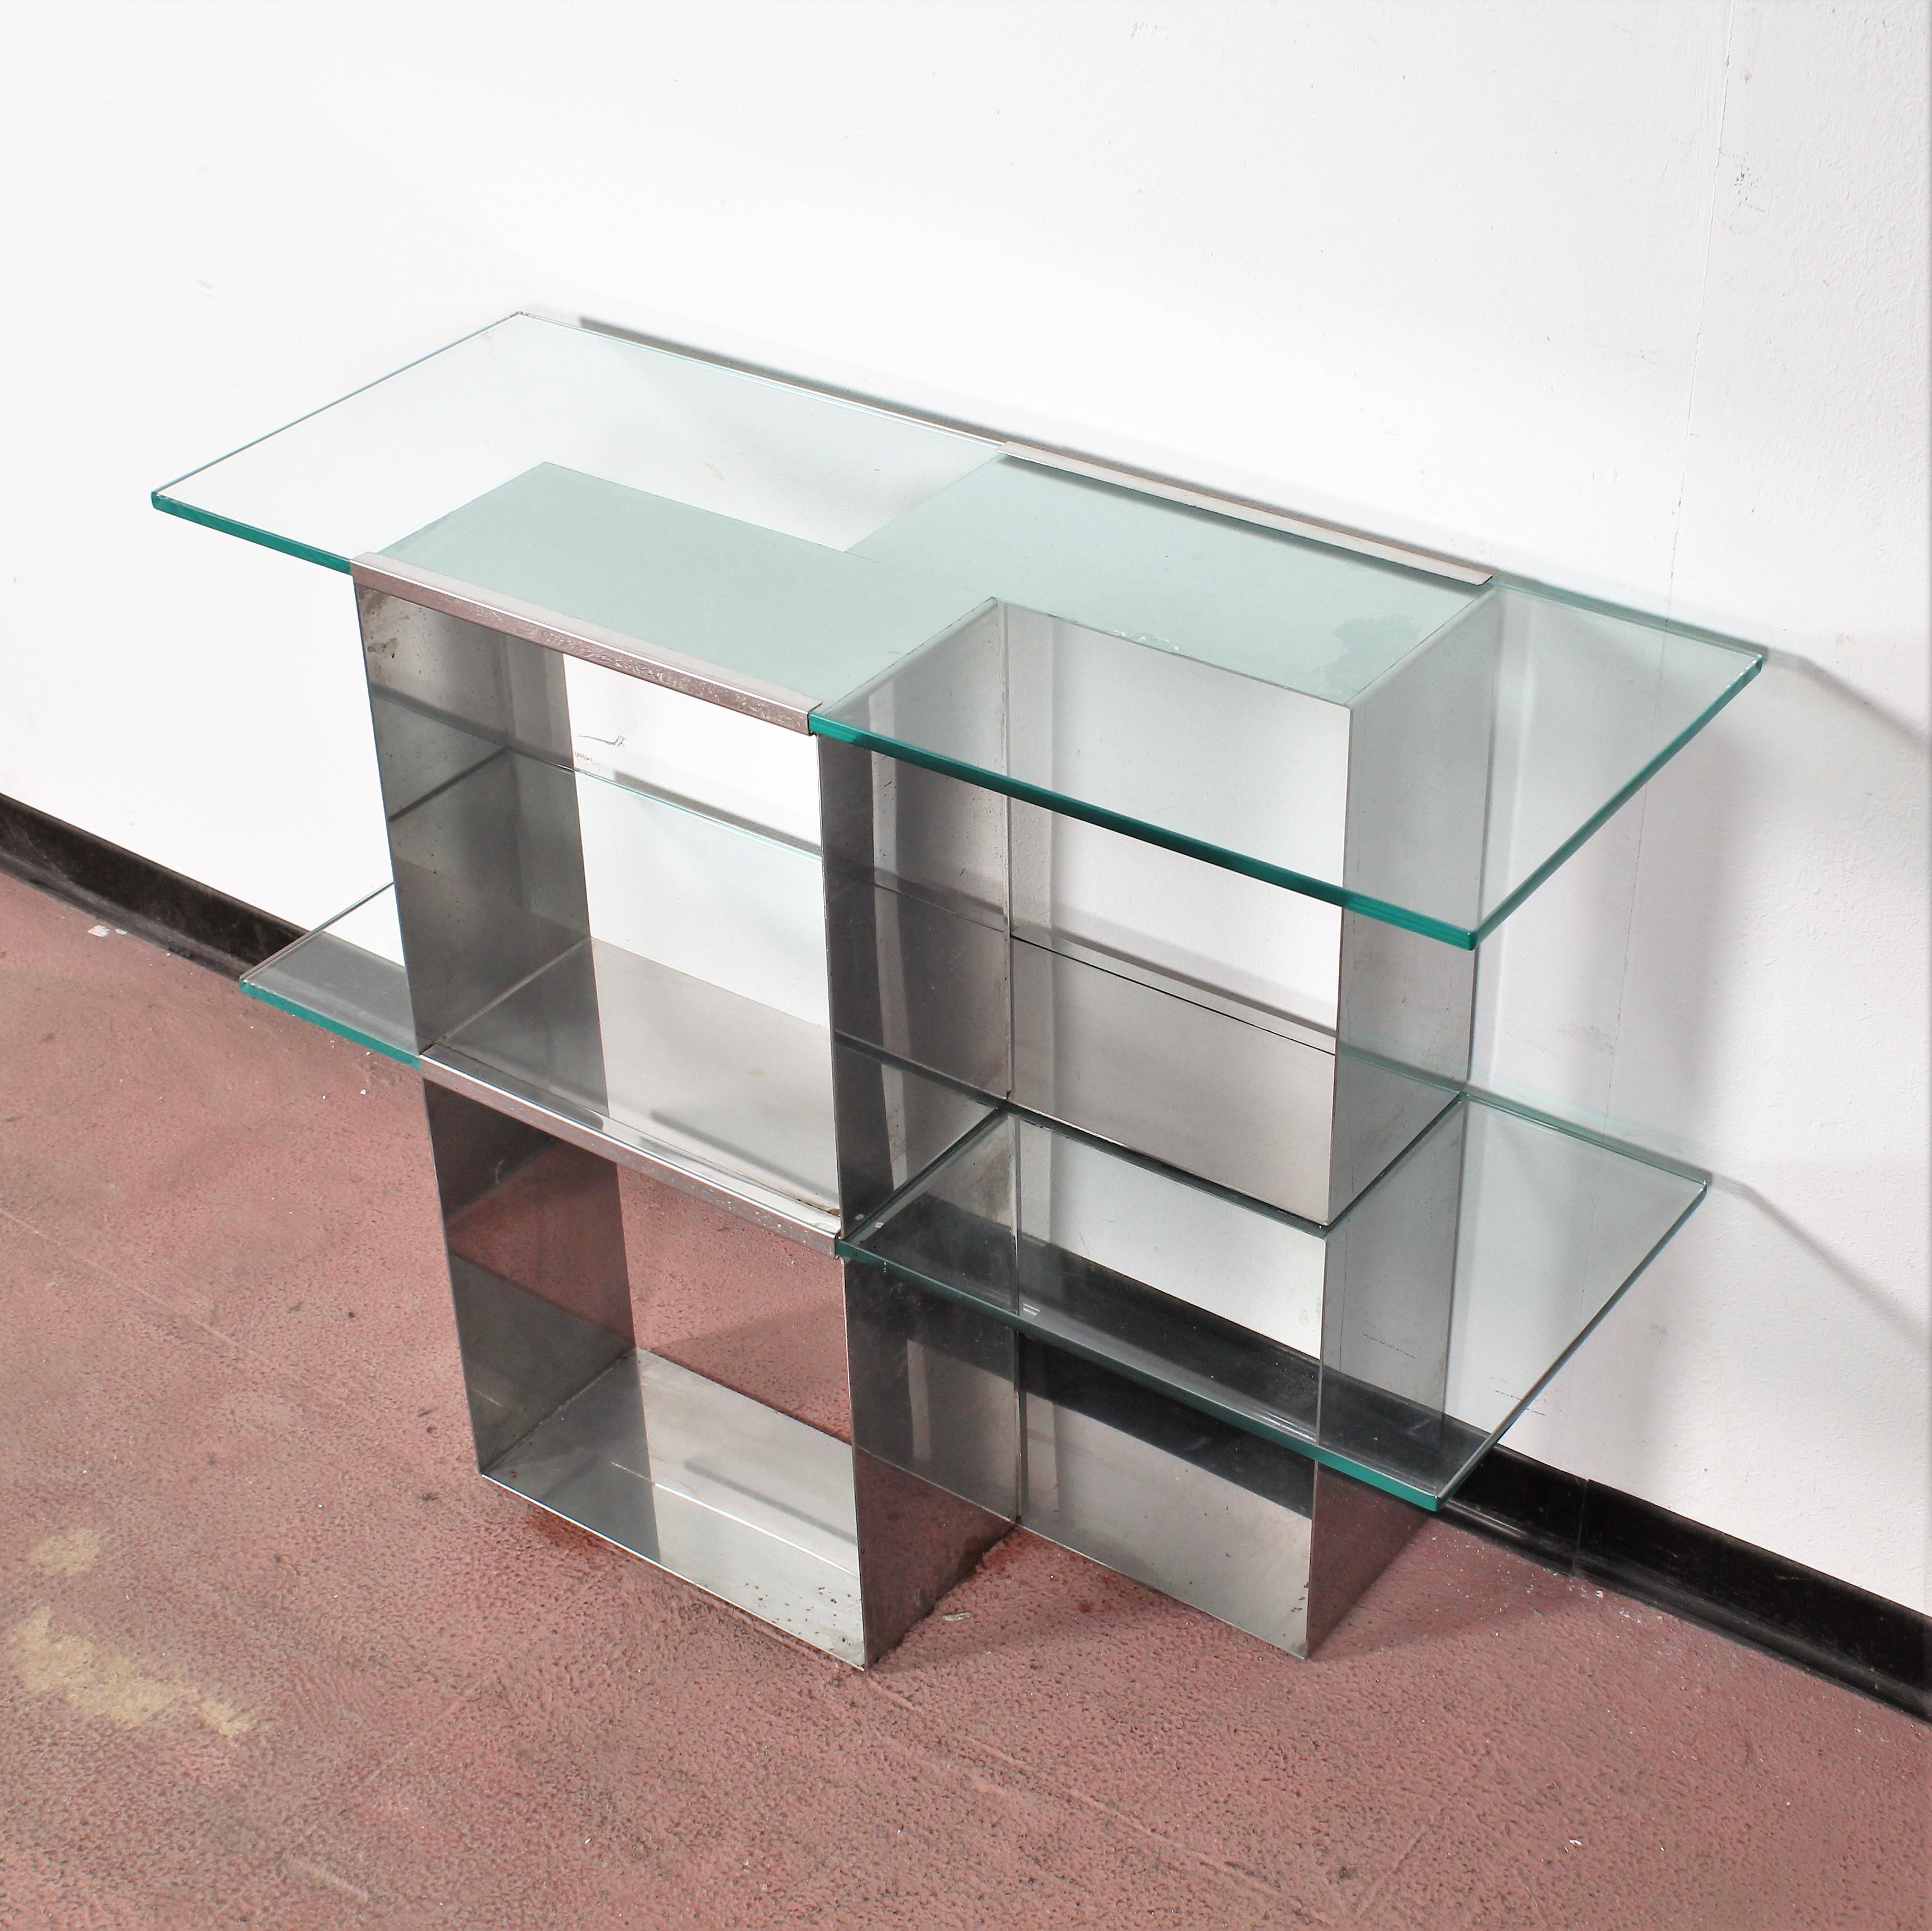 Midcentury V. Introini 'Attributed' Steel and Glass Console and Mirror, Italy (Ende des 20. Jahrhunderts)